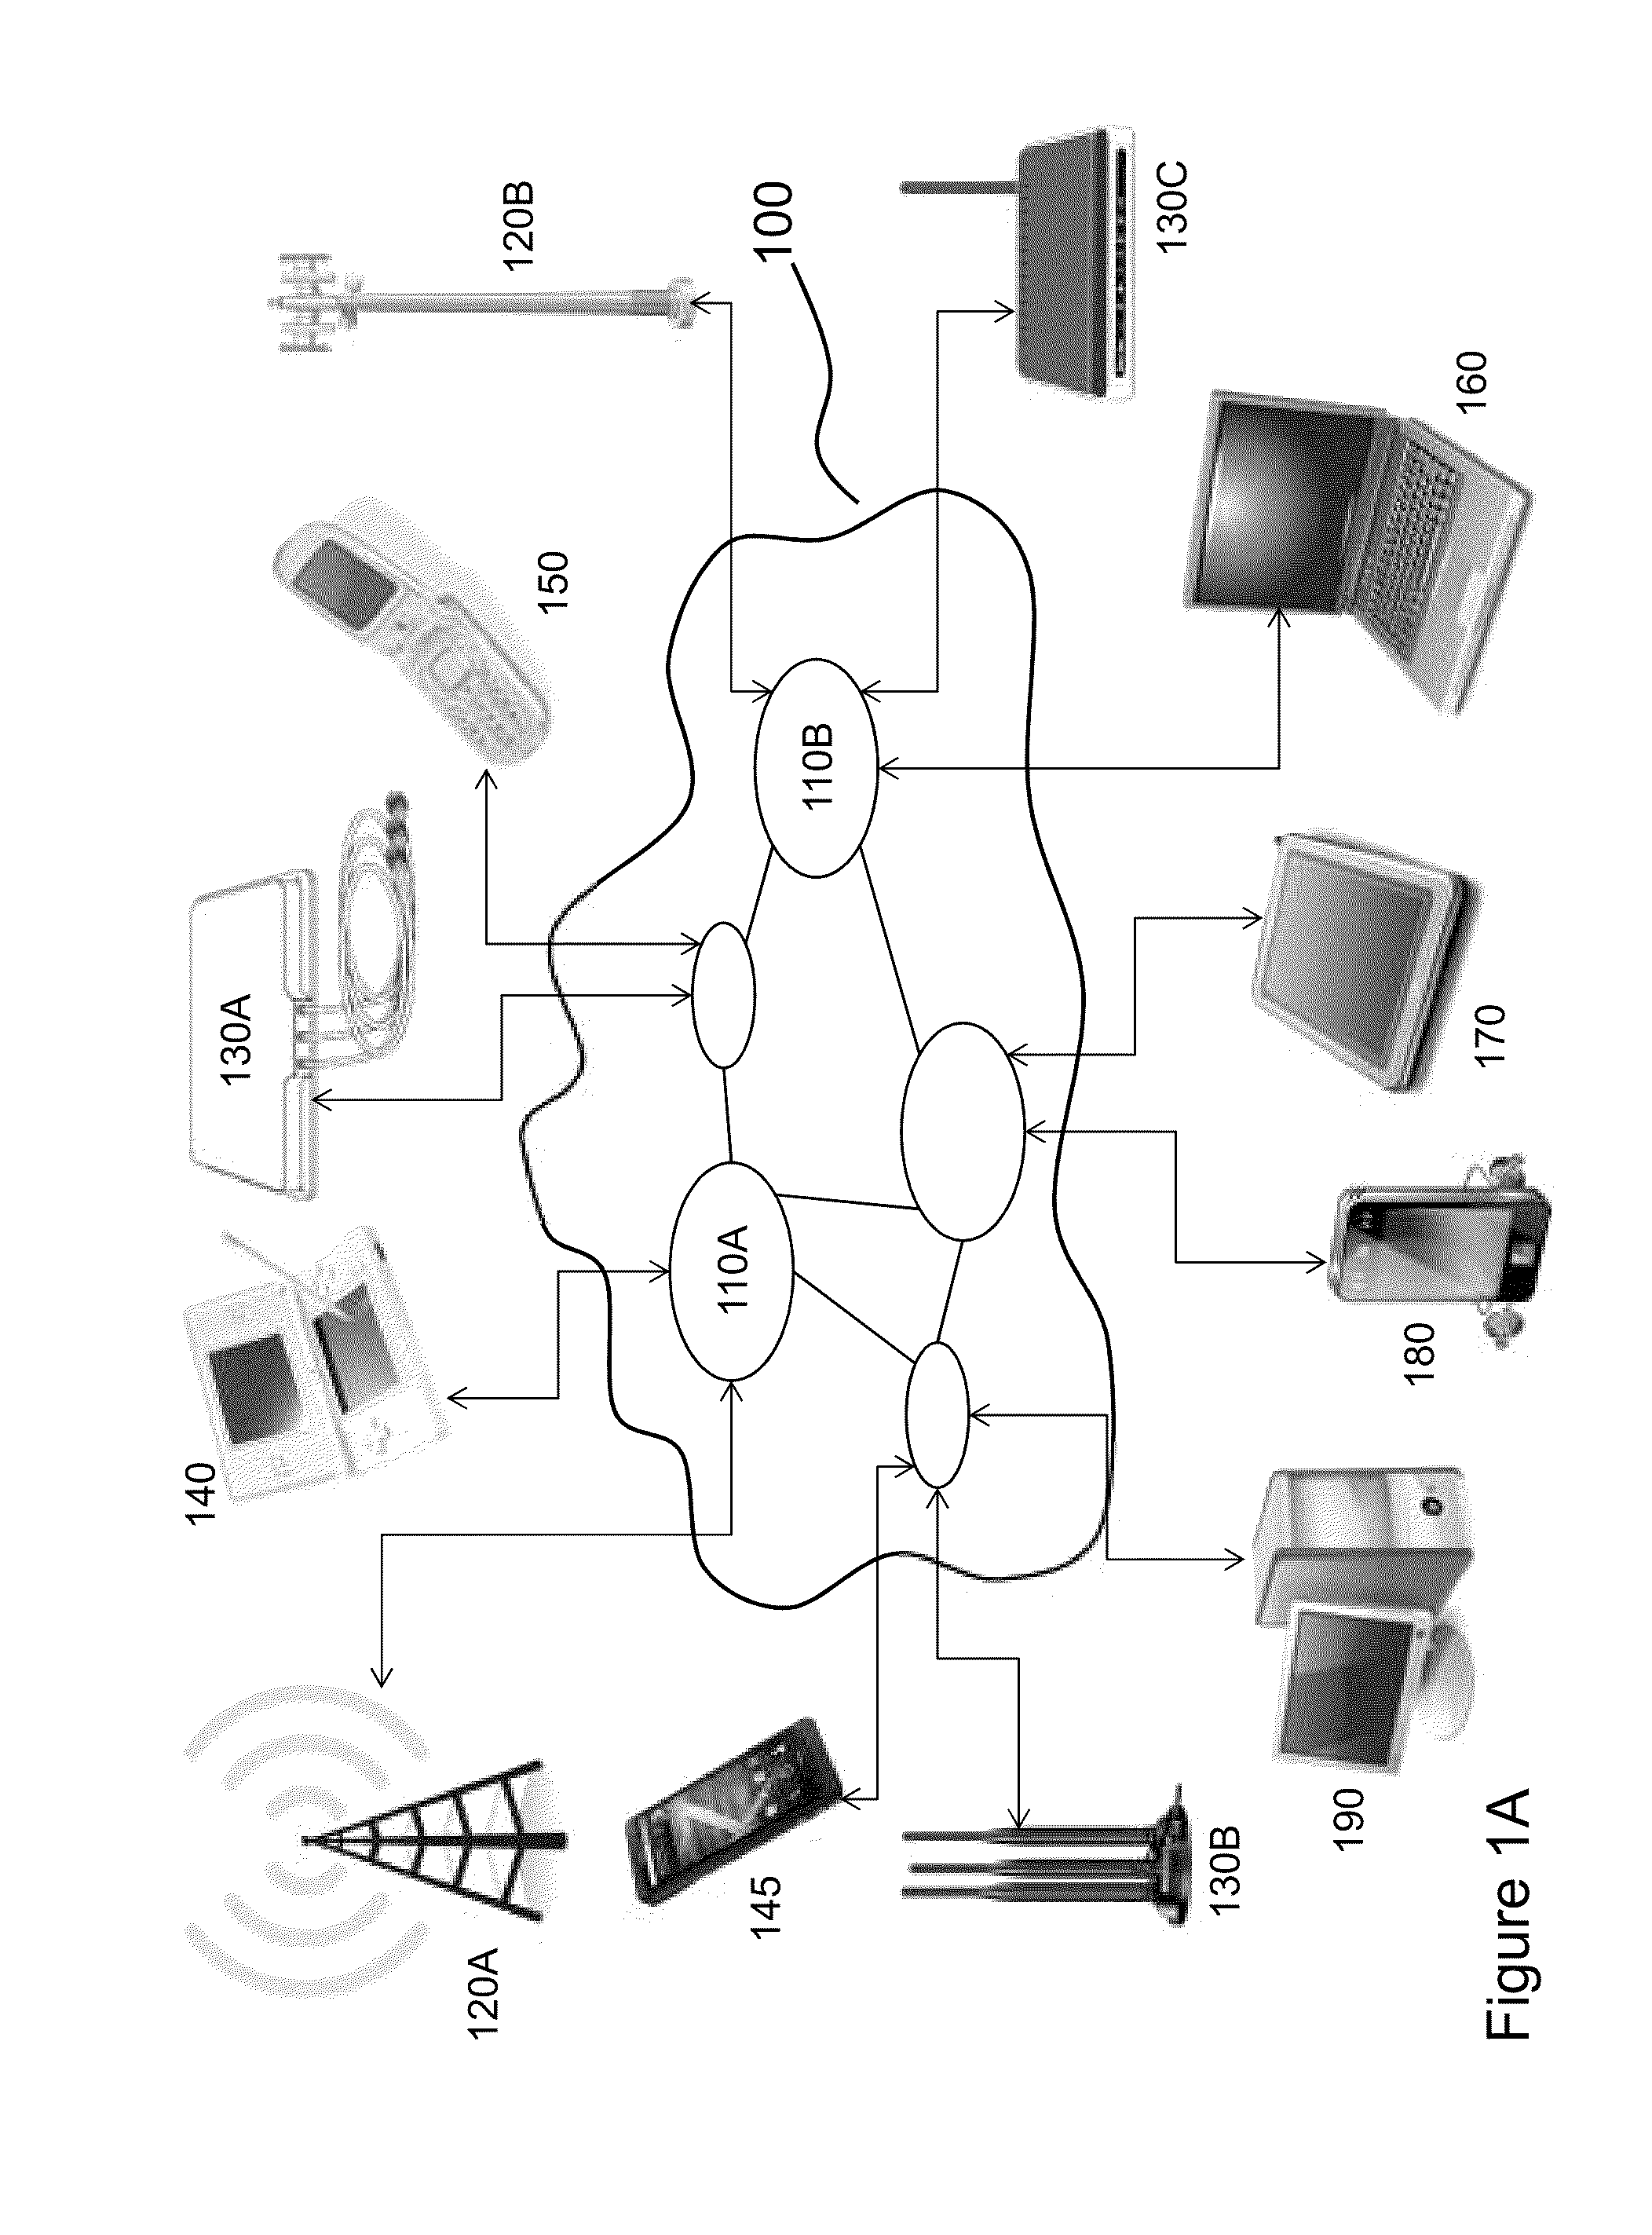 Radio frequency receiver system for wideband signal processing